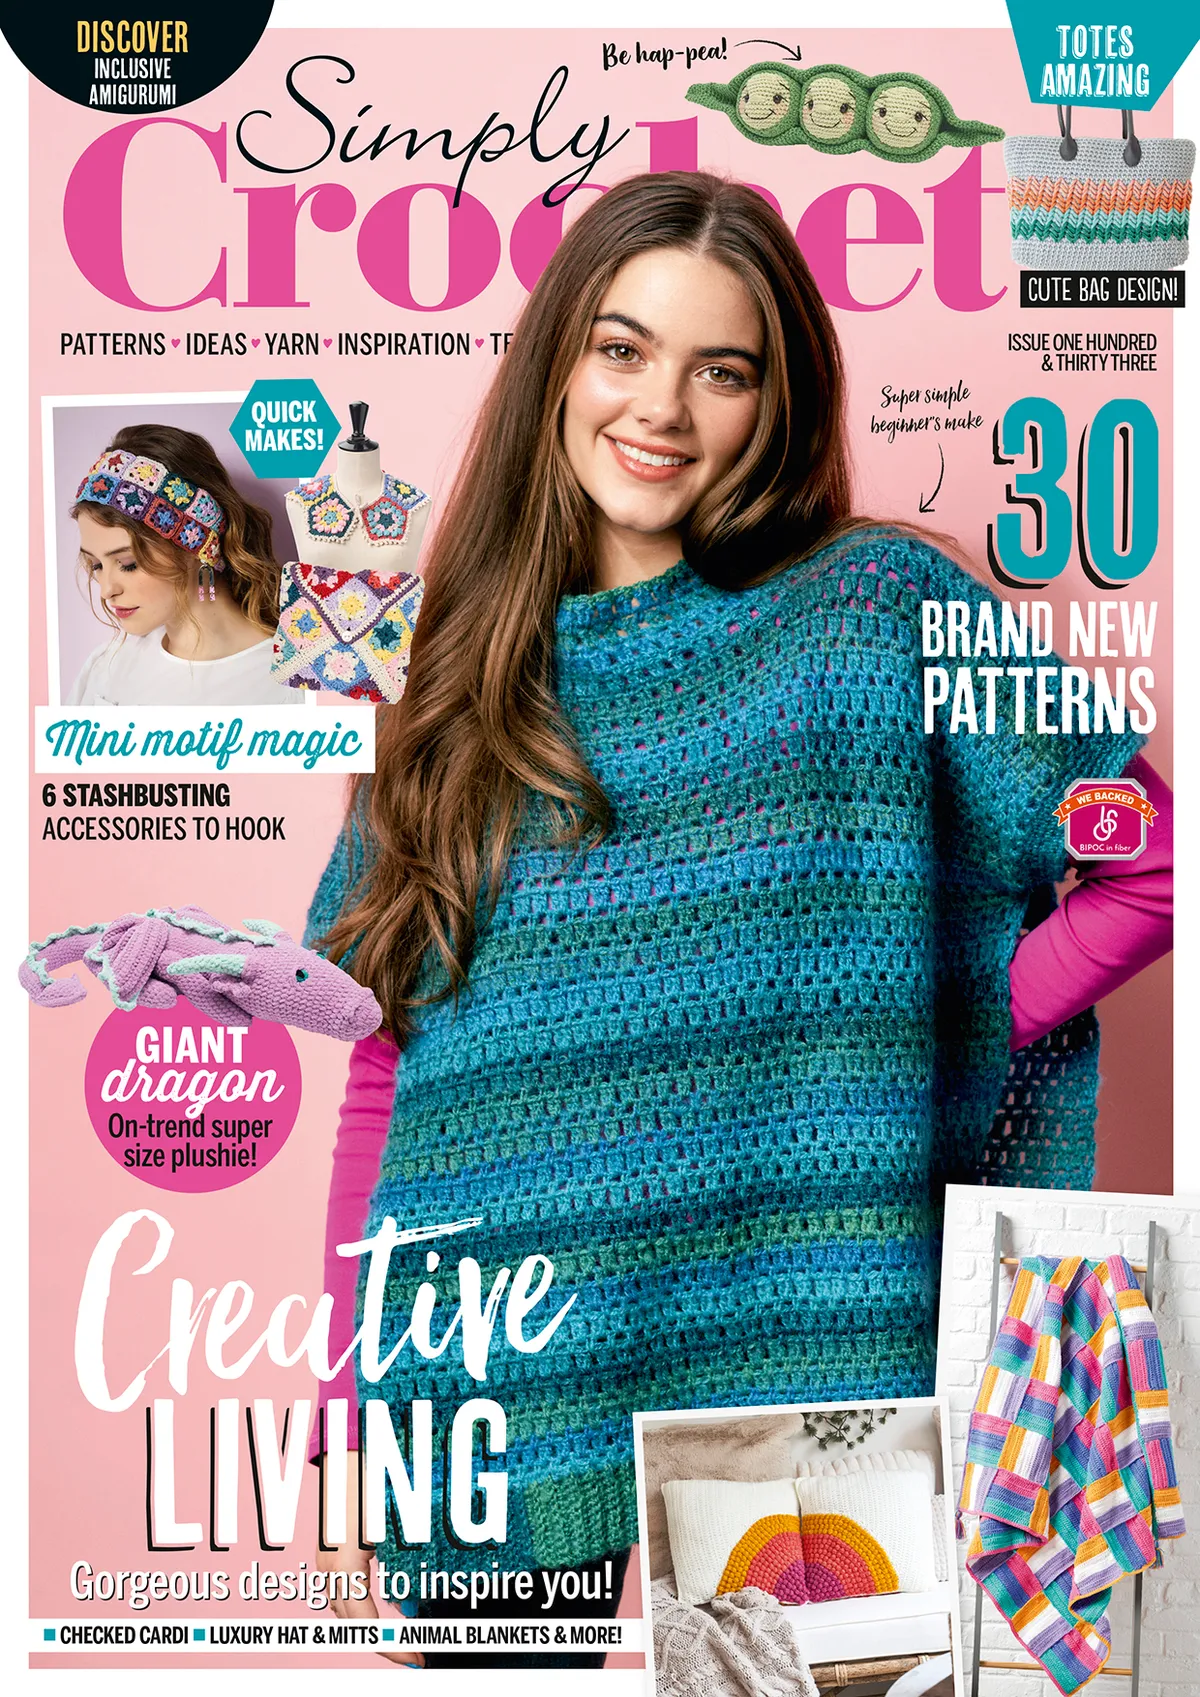 Simply Crochet issue 133 cover